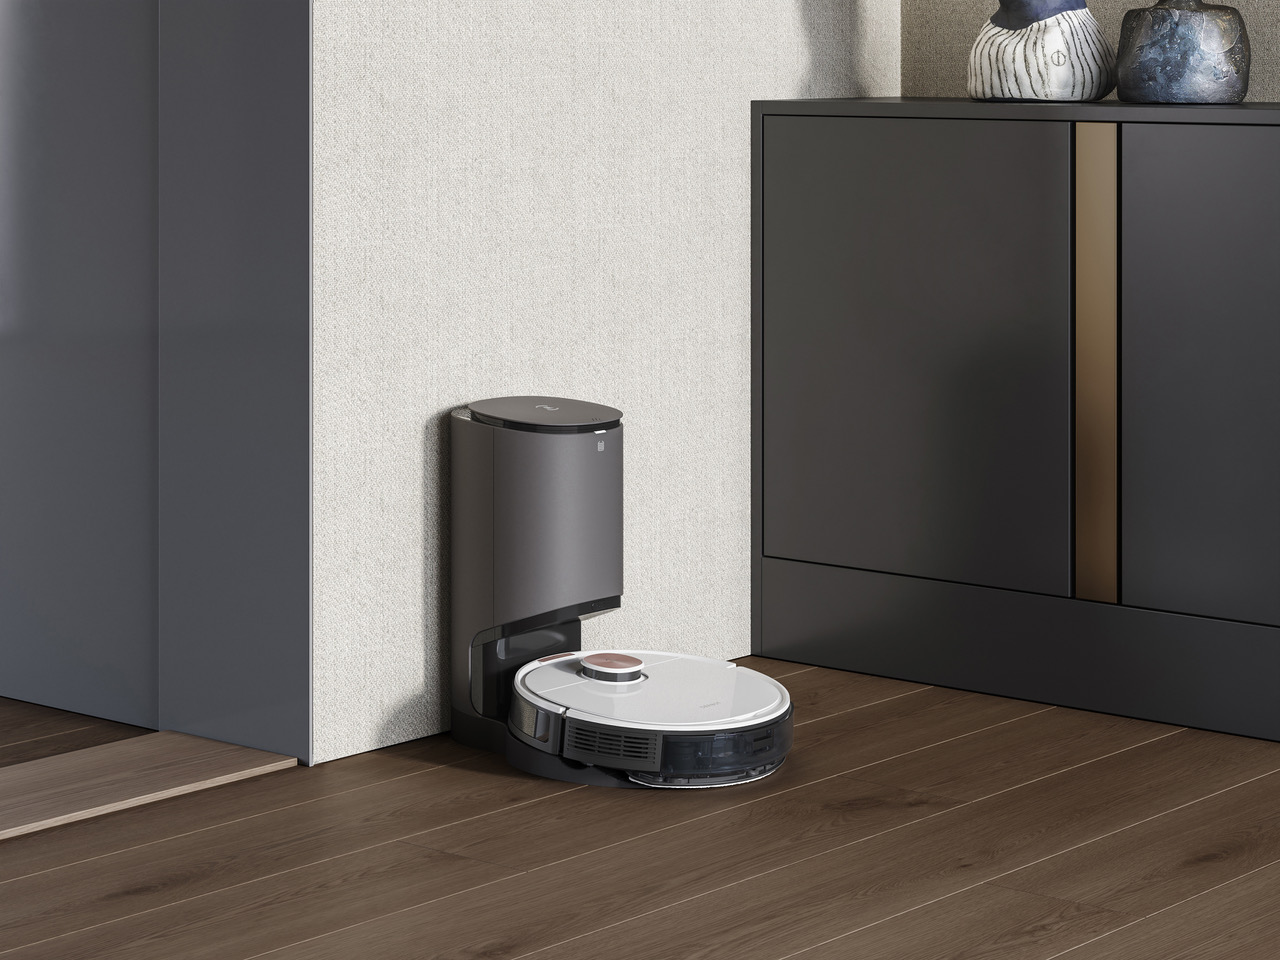 Human Kind Has Peaked: There Is Now A Robot Vacuum Cleaner That Mops And Empties Itself